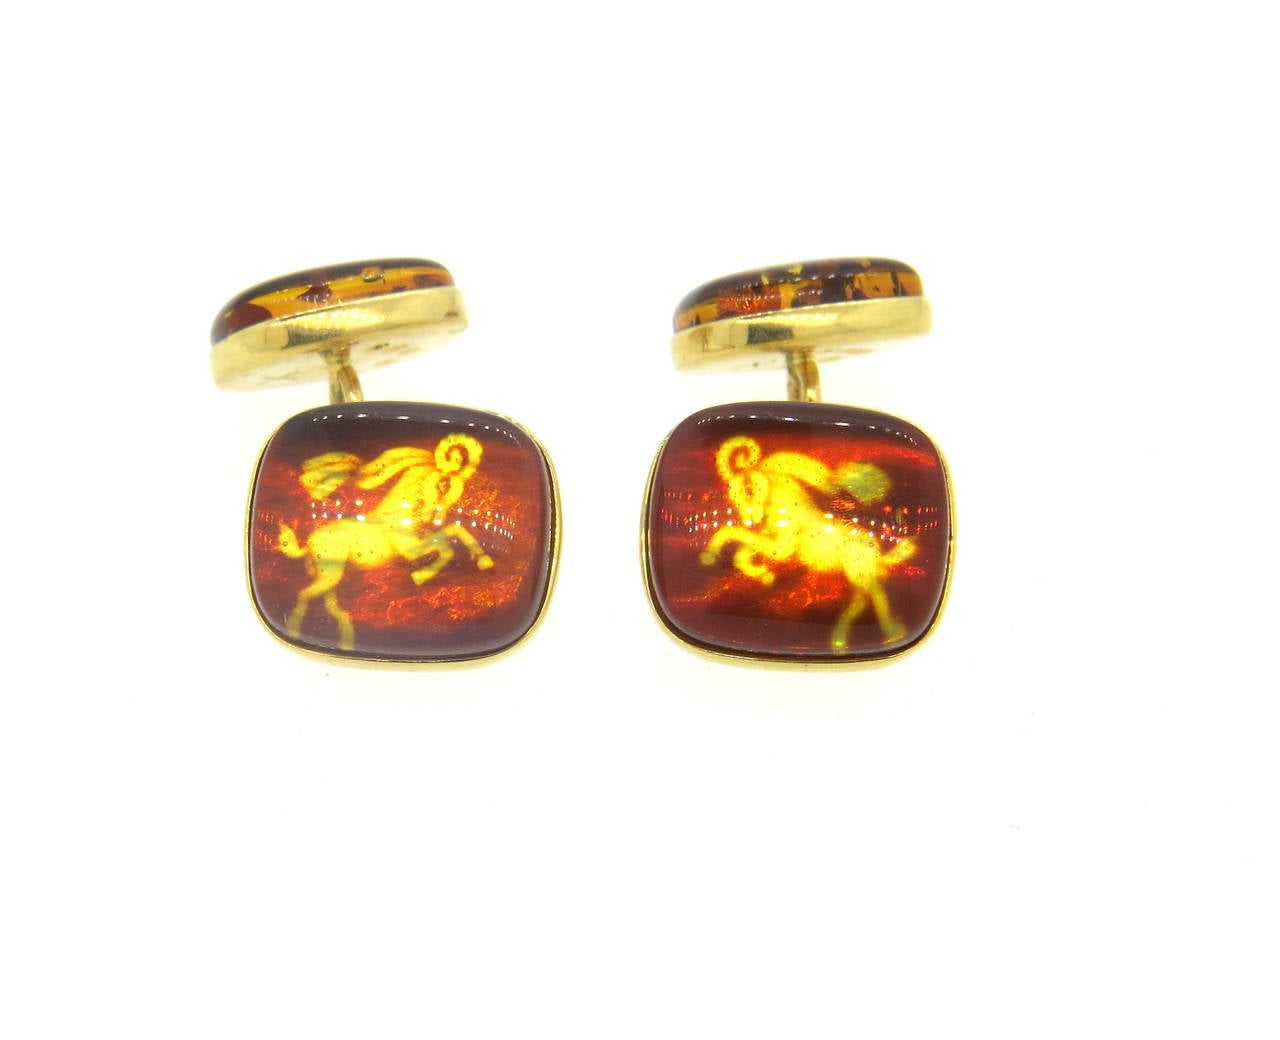 A pair of 18k yellow gold cufflinks, crafted by Trianon, featuring amber gesmtones with Capricorn zodiac sign. Tops measure 15mm x 13mm, back - 13mm x 11mm. Marked Trianon, 750. Weight - 8.2 grams
Retail $3000